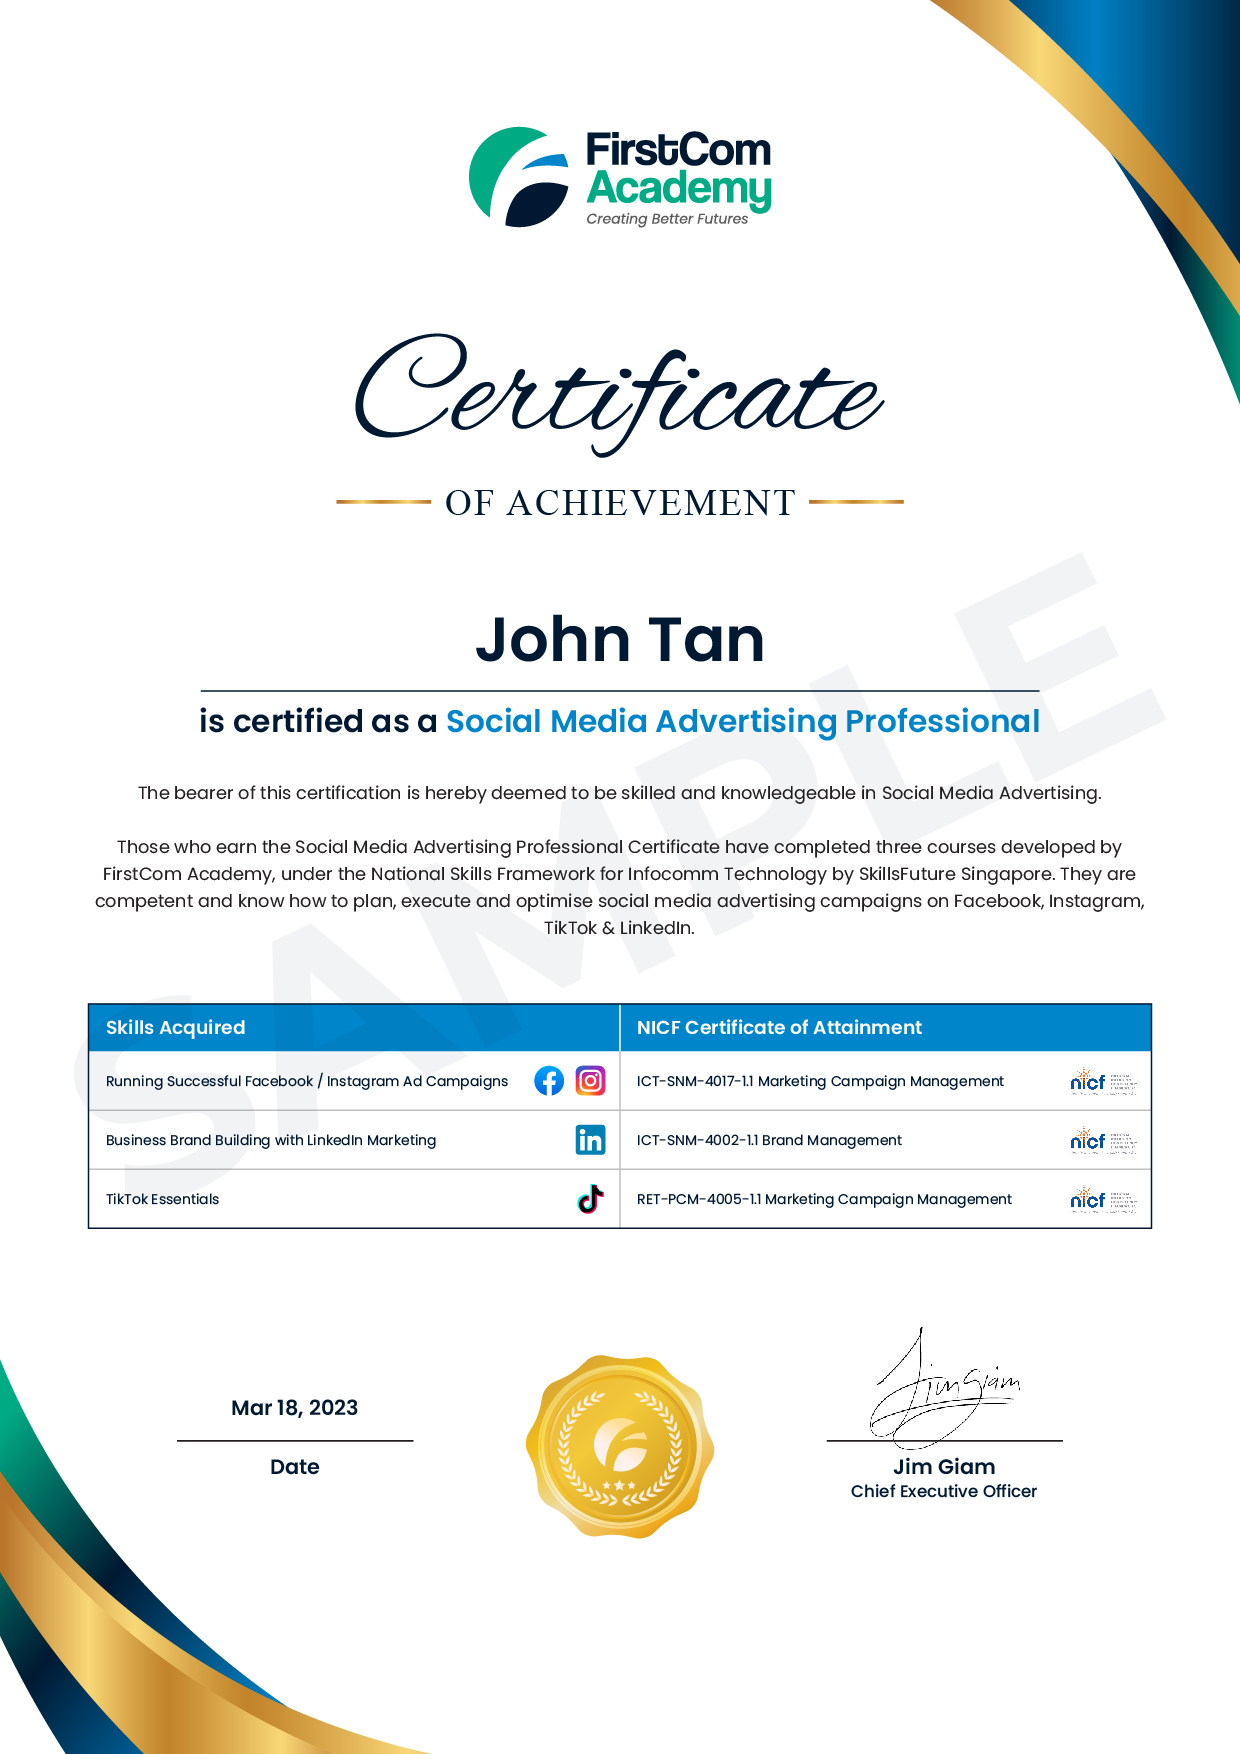 Social Media Advertising Profiessional programme course certificate by FirstCom Academy Singapore